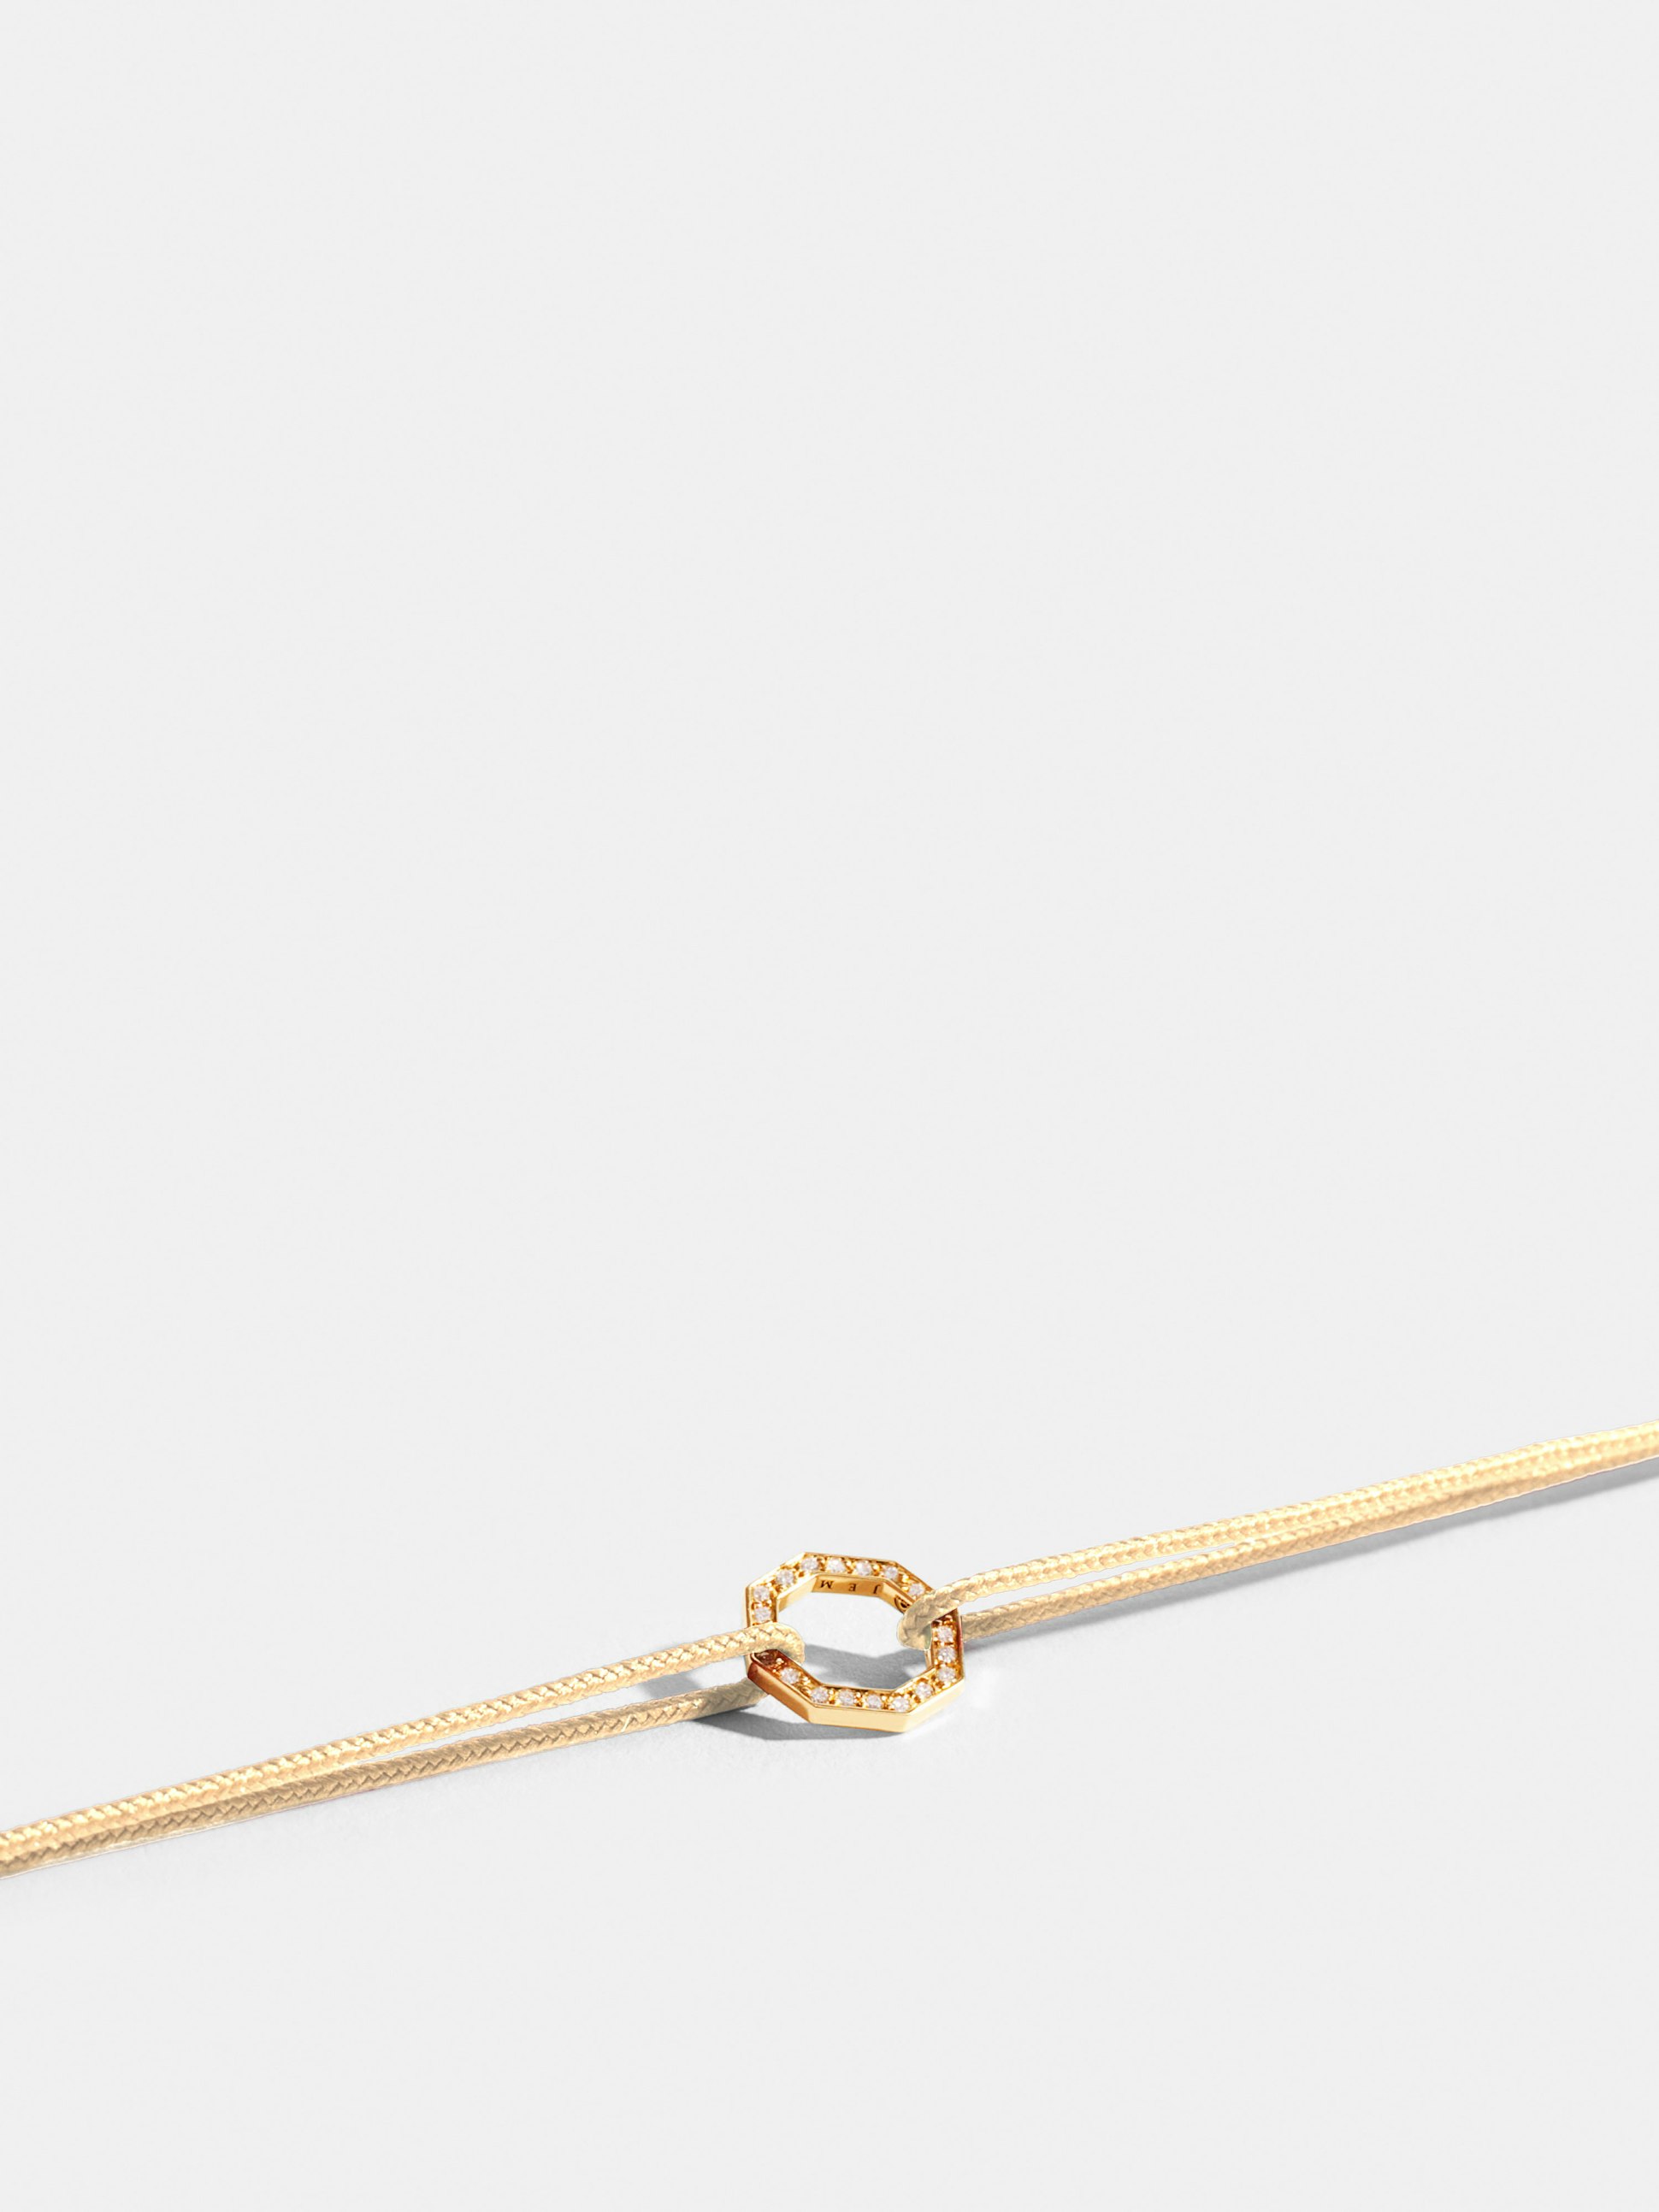 Octogone motif in 18k Fairmined ethical yellow gold, paved with lab-grown diamonds, on an antique ivory white.